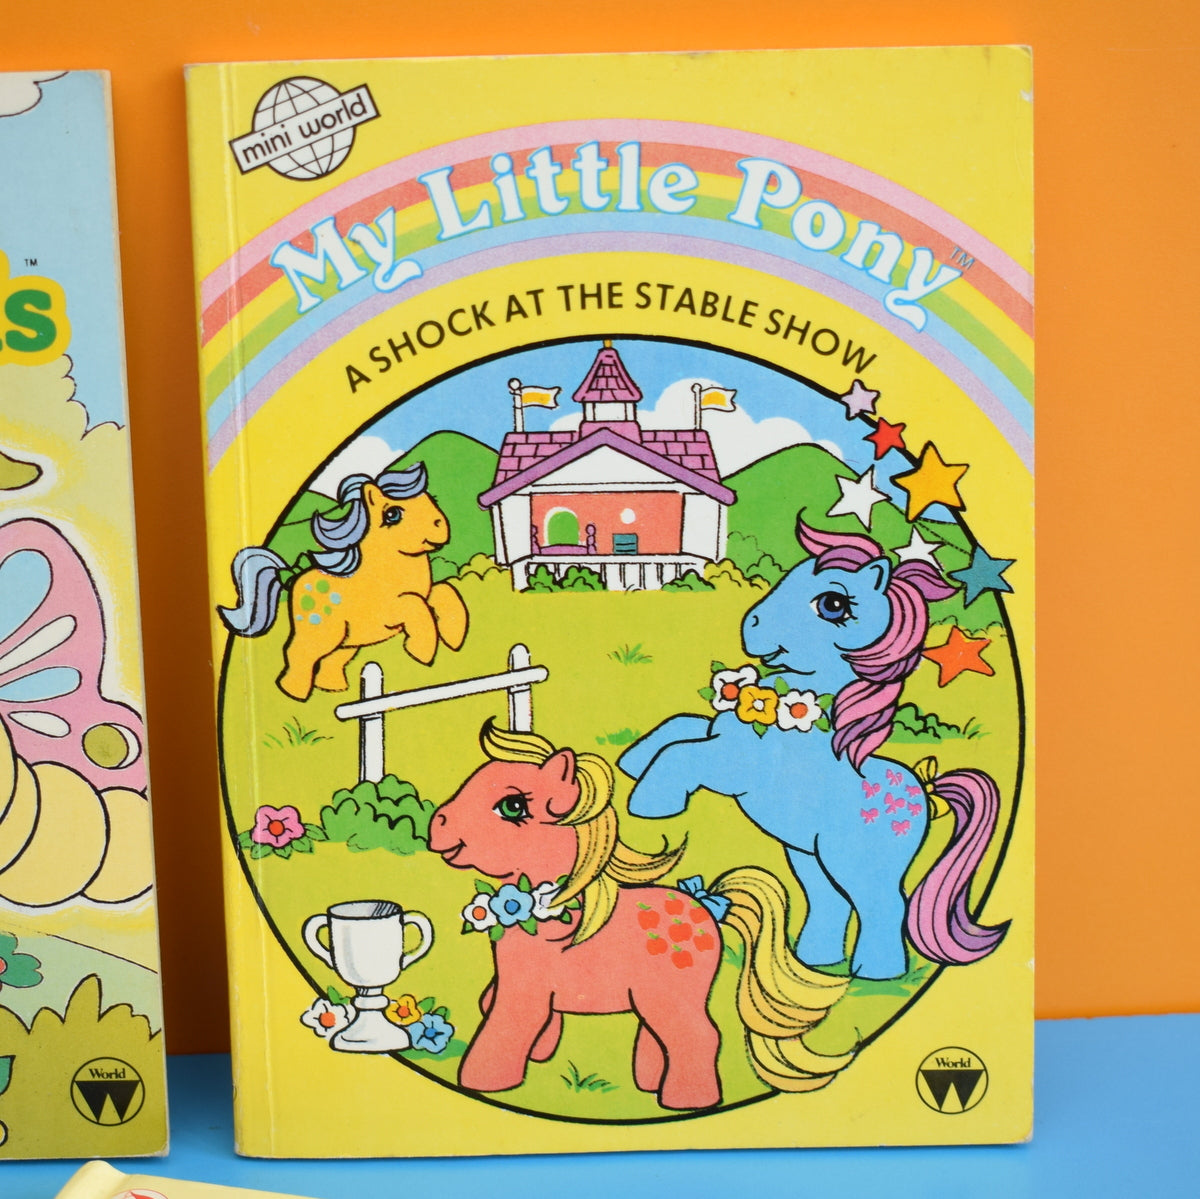 Vintage 1980s My Little Pony, Wuzzles, Glo Friends, Care Bears Books